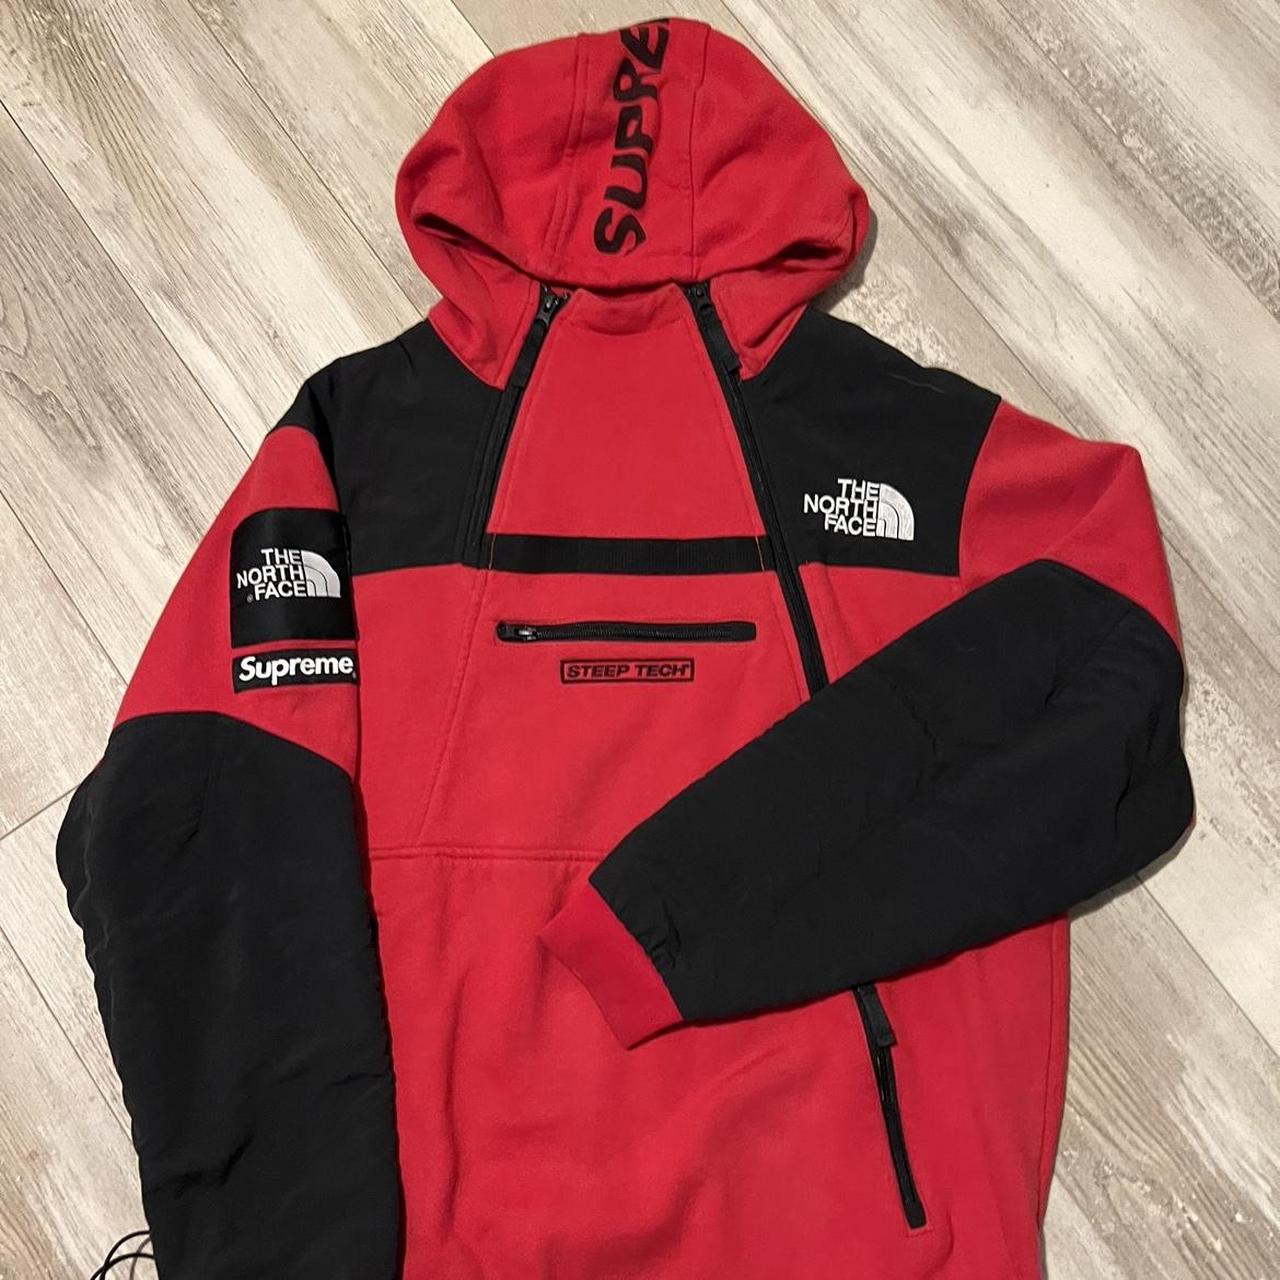 Supreme x The North Face Steep Tech Hoodie - White, Size Medium